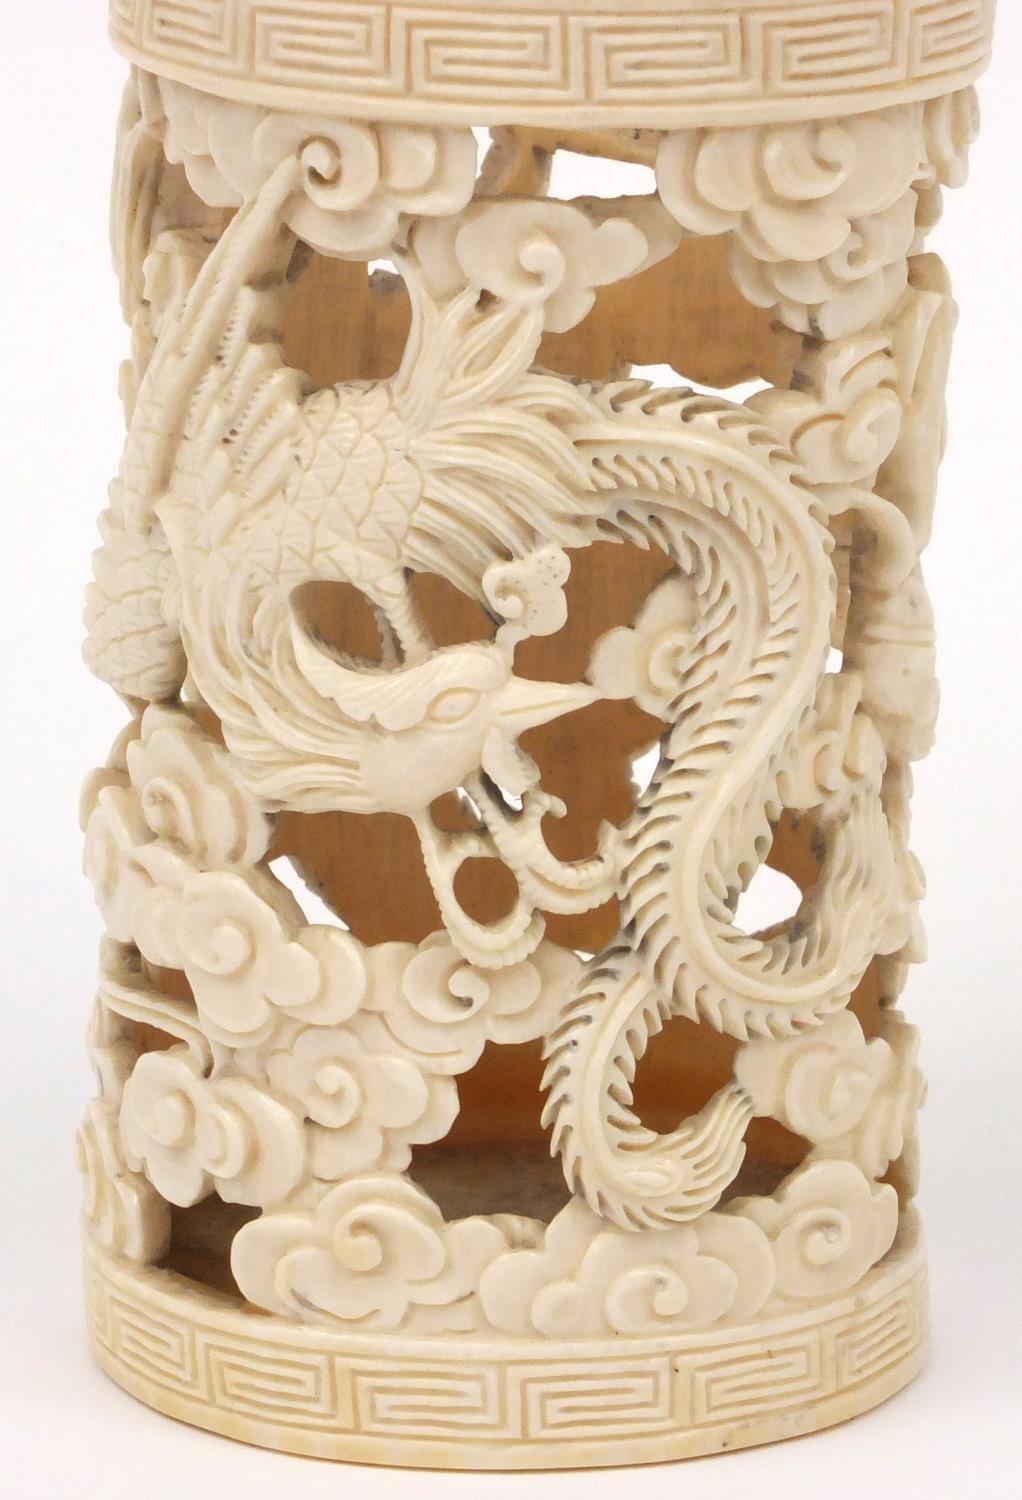 Oriental Chinese ivory pot carved and pierced with dragons, 11cm high - Image 5 of 8